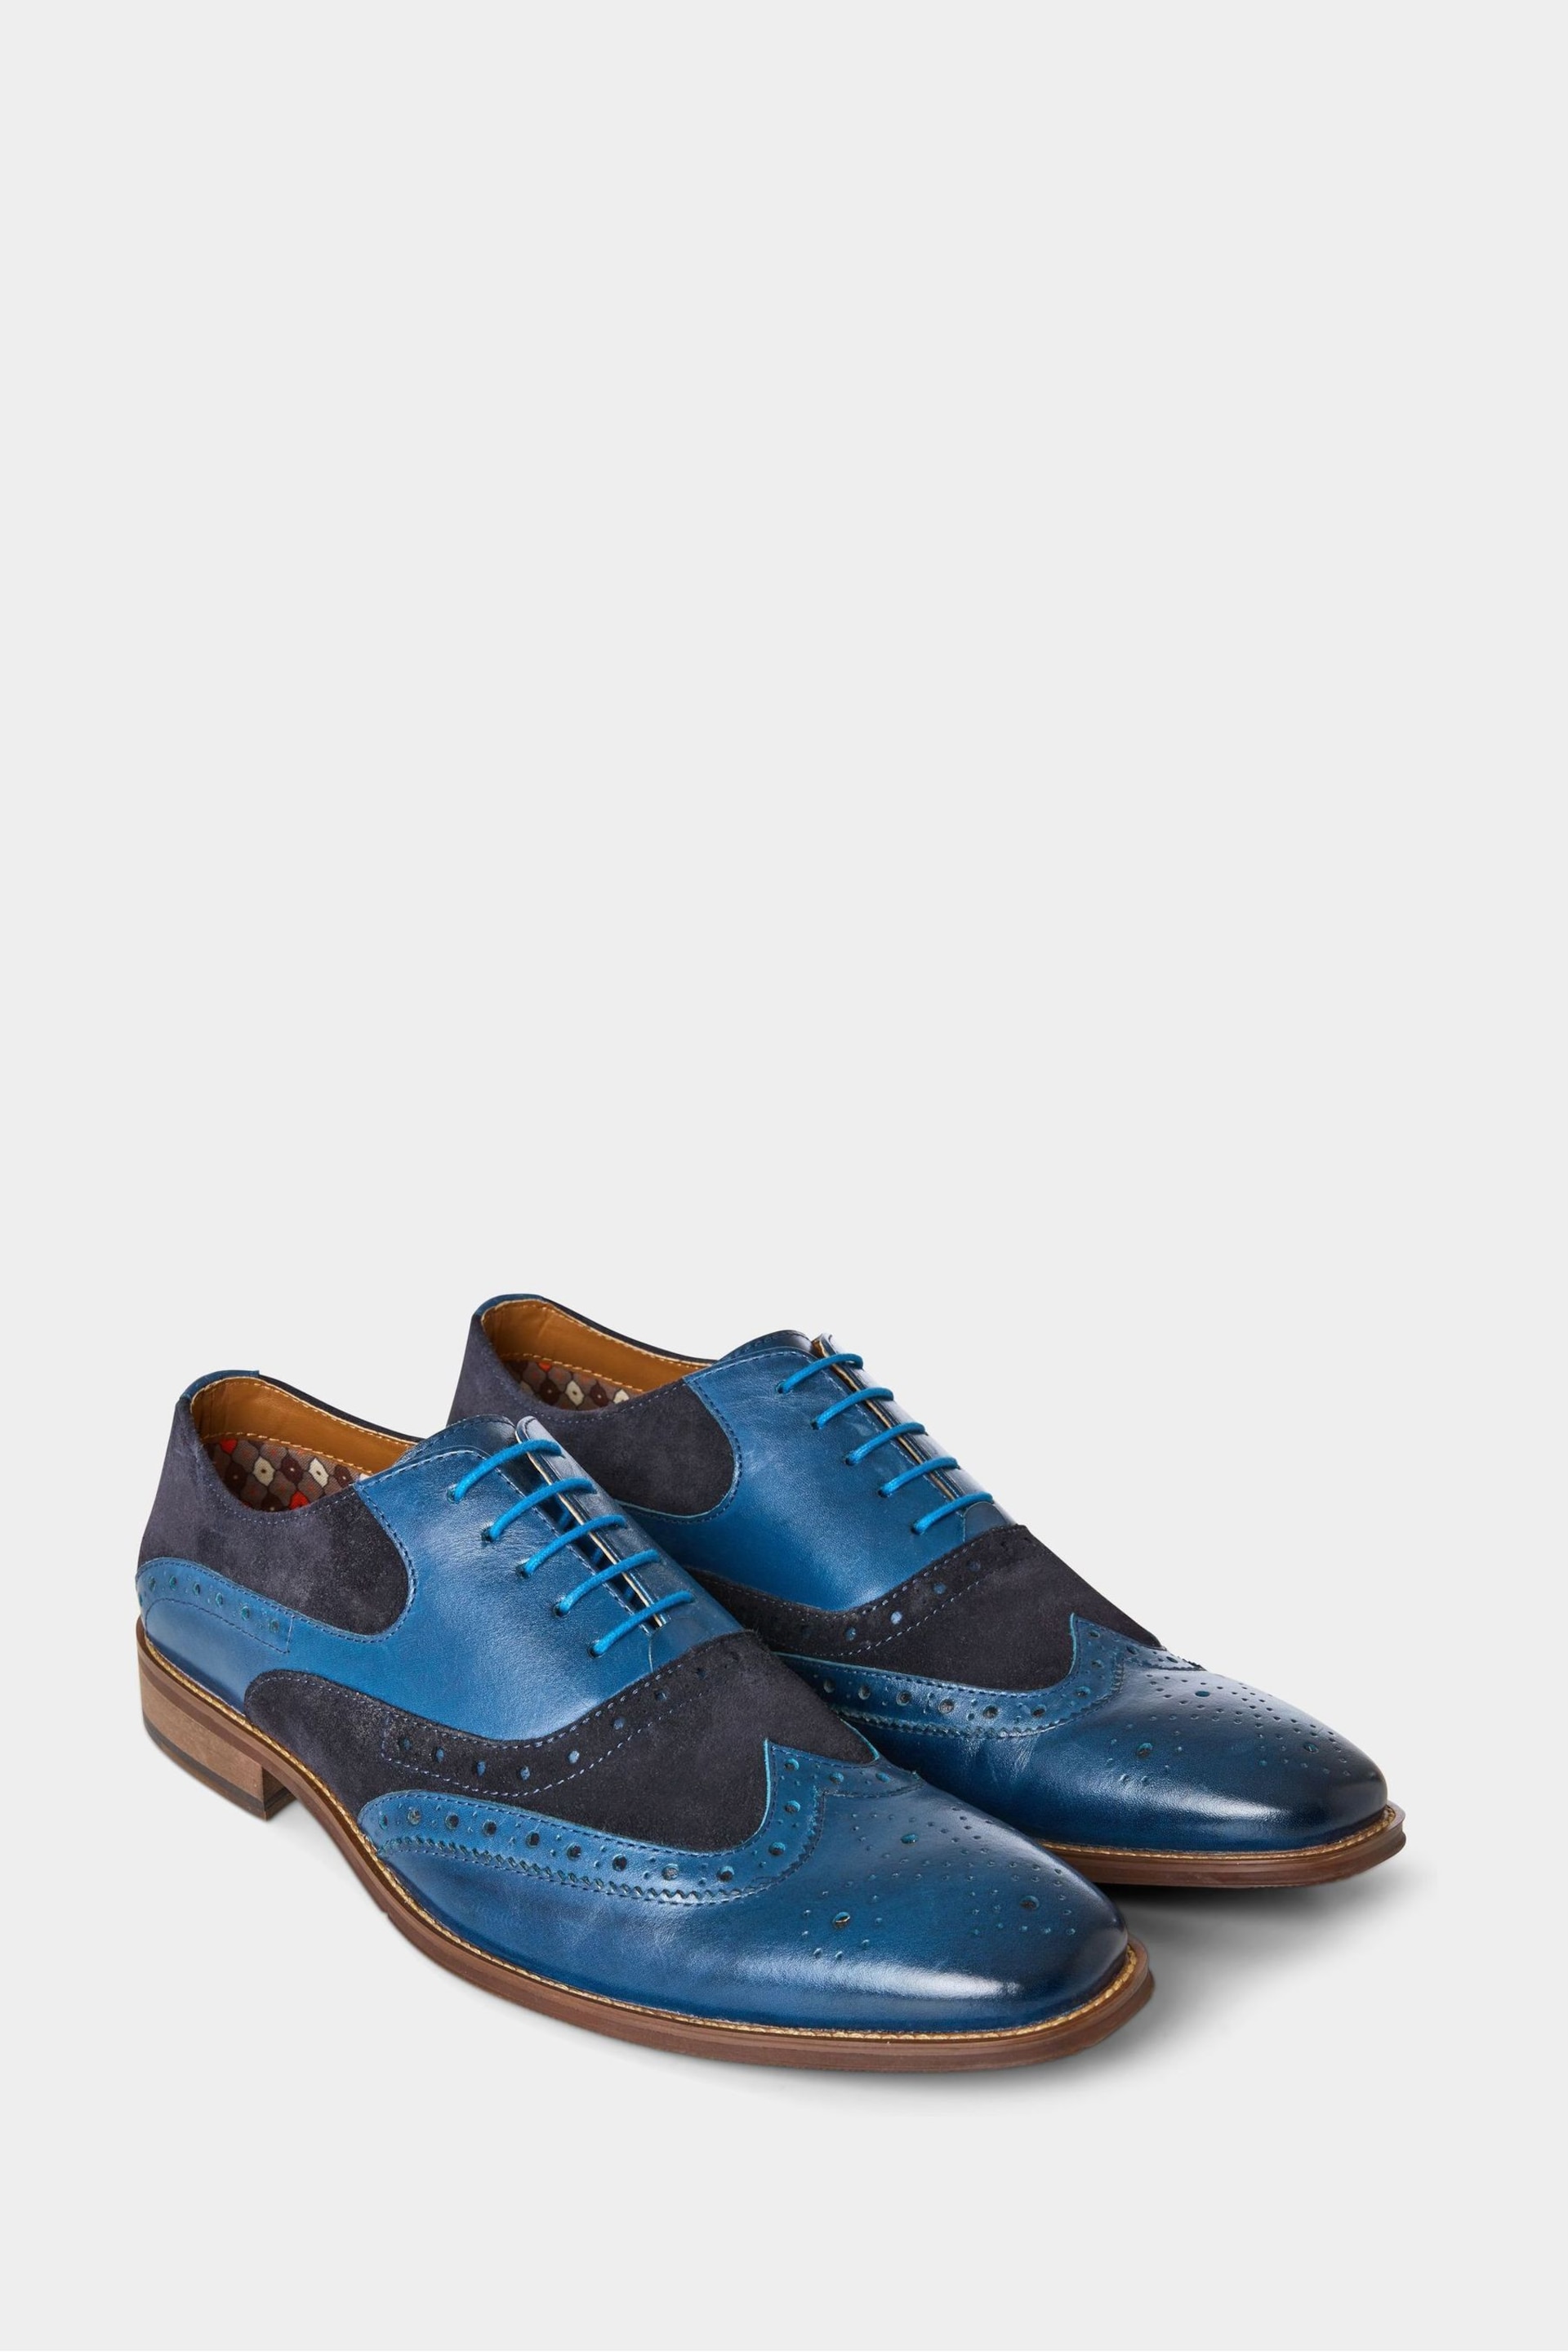 Joe Browns Blue Statement Leather Suede Brogues - Image 1 of 5